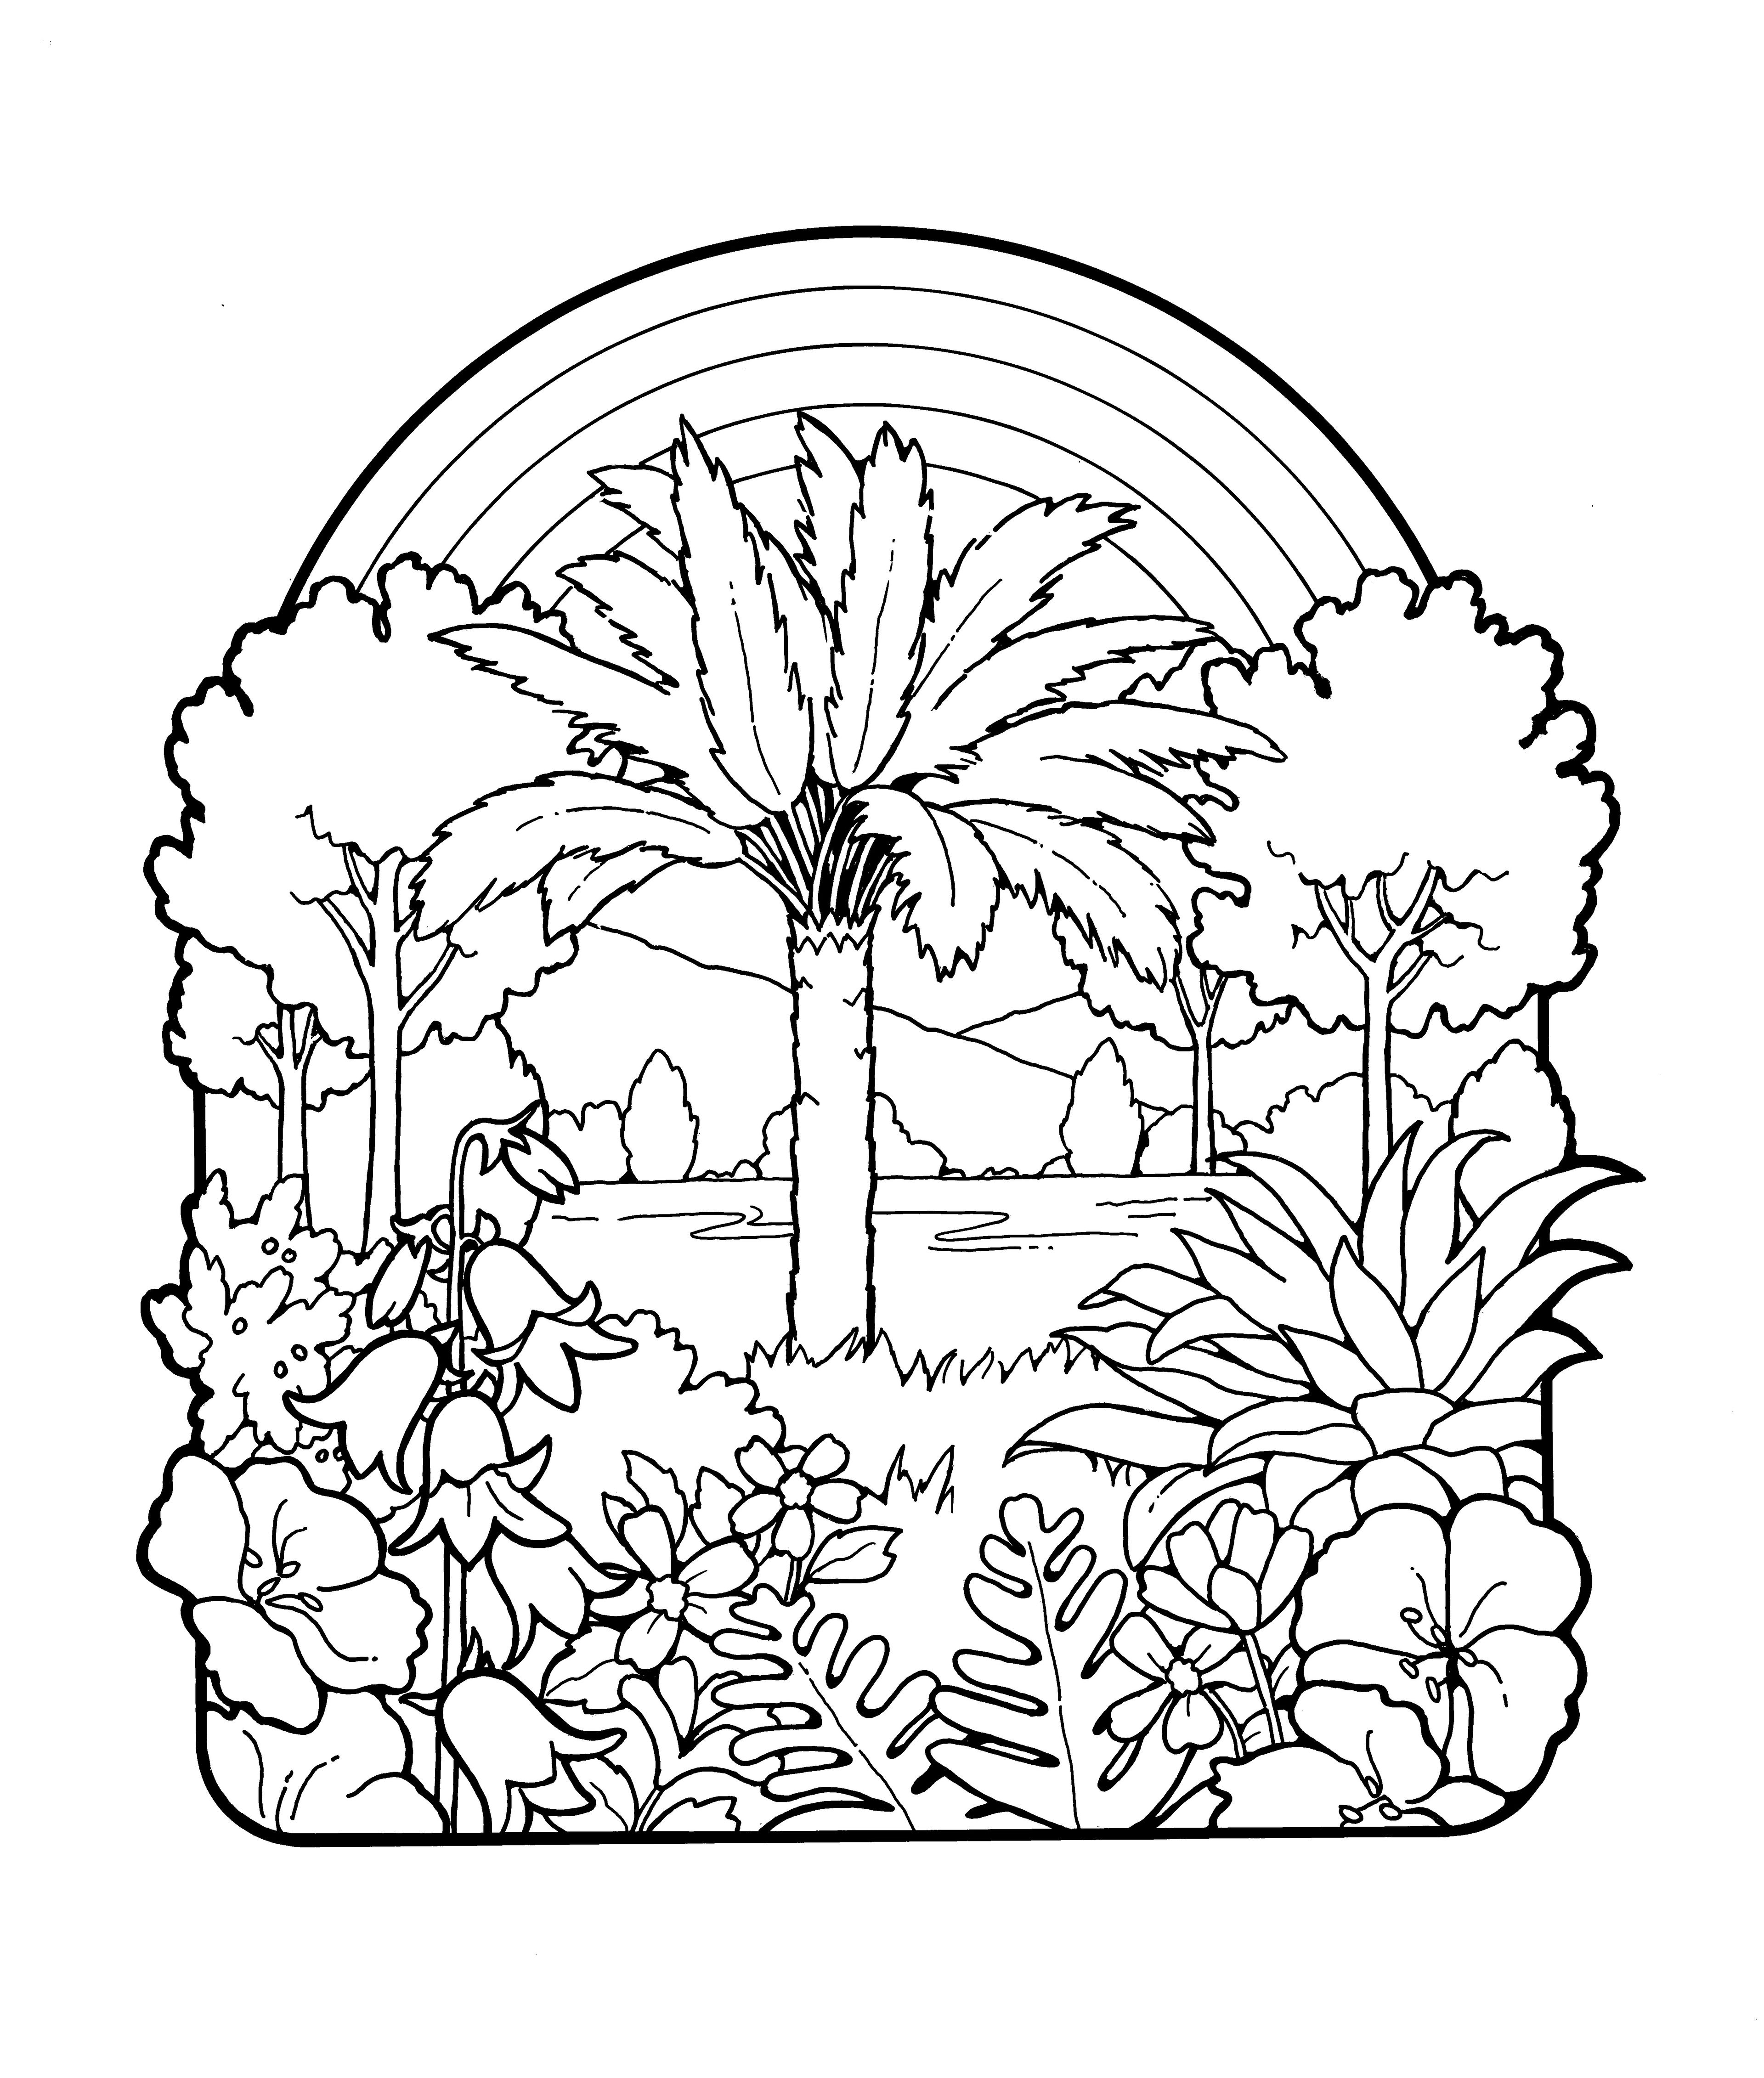 An illustration of plants and a rainbow.